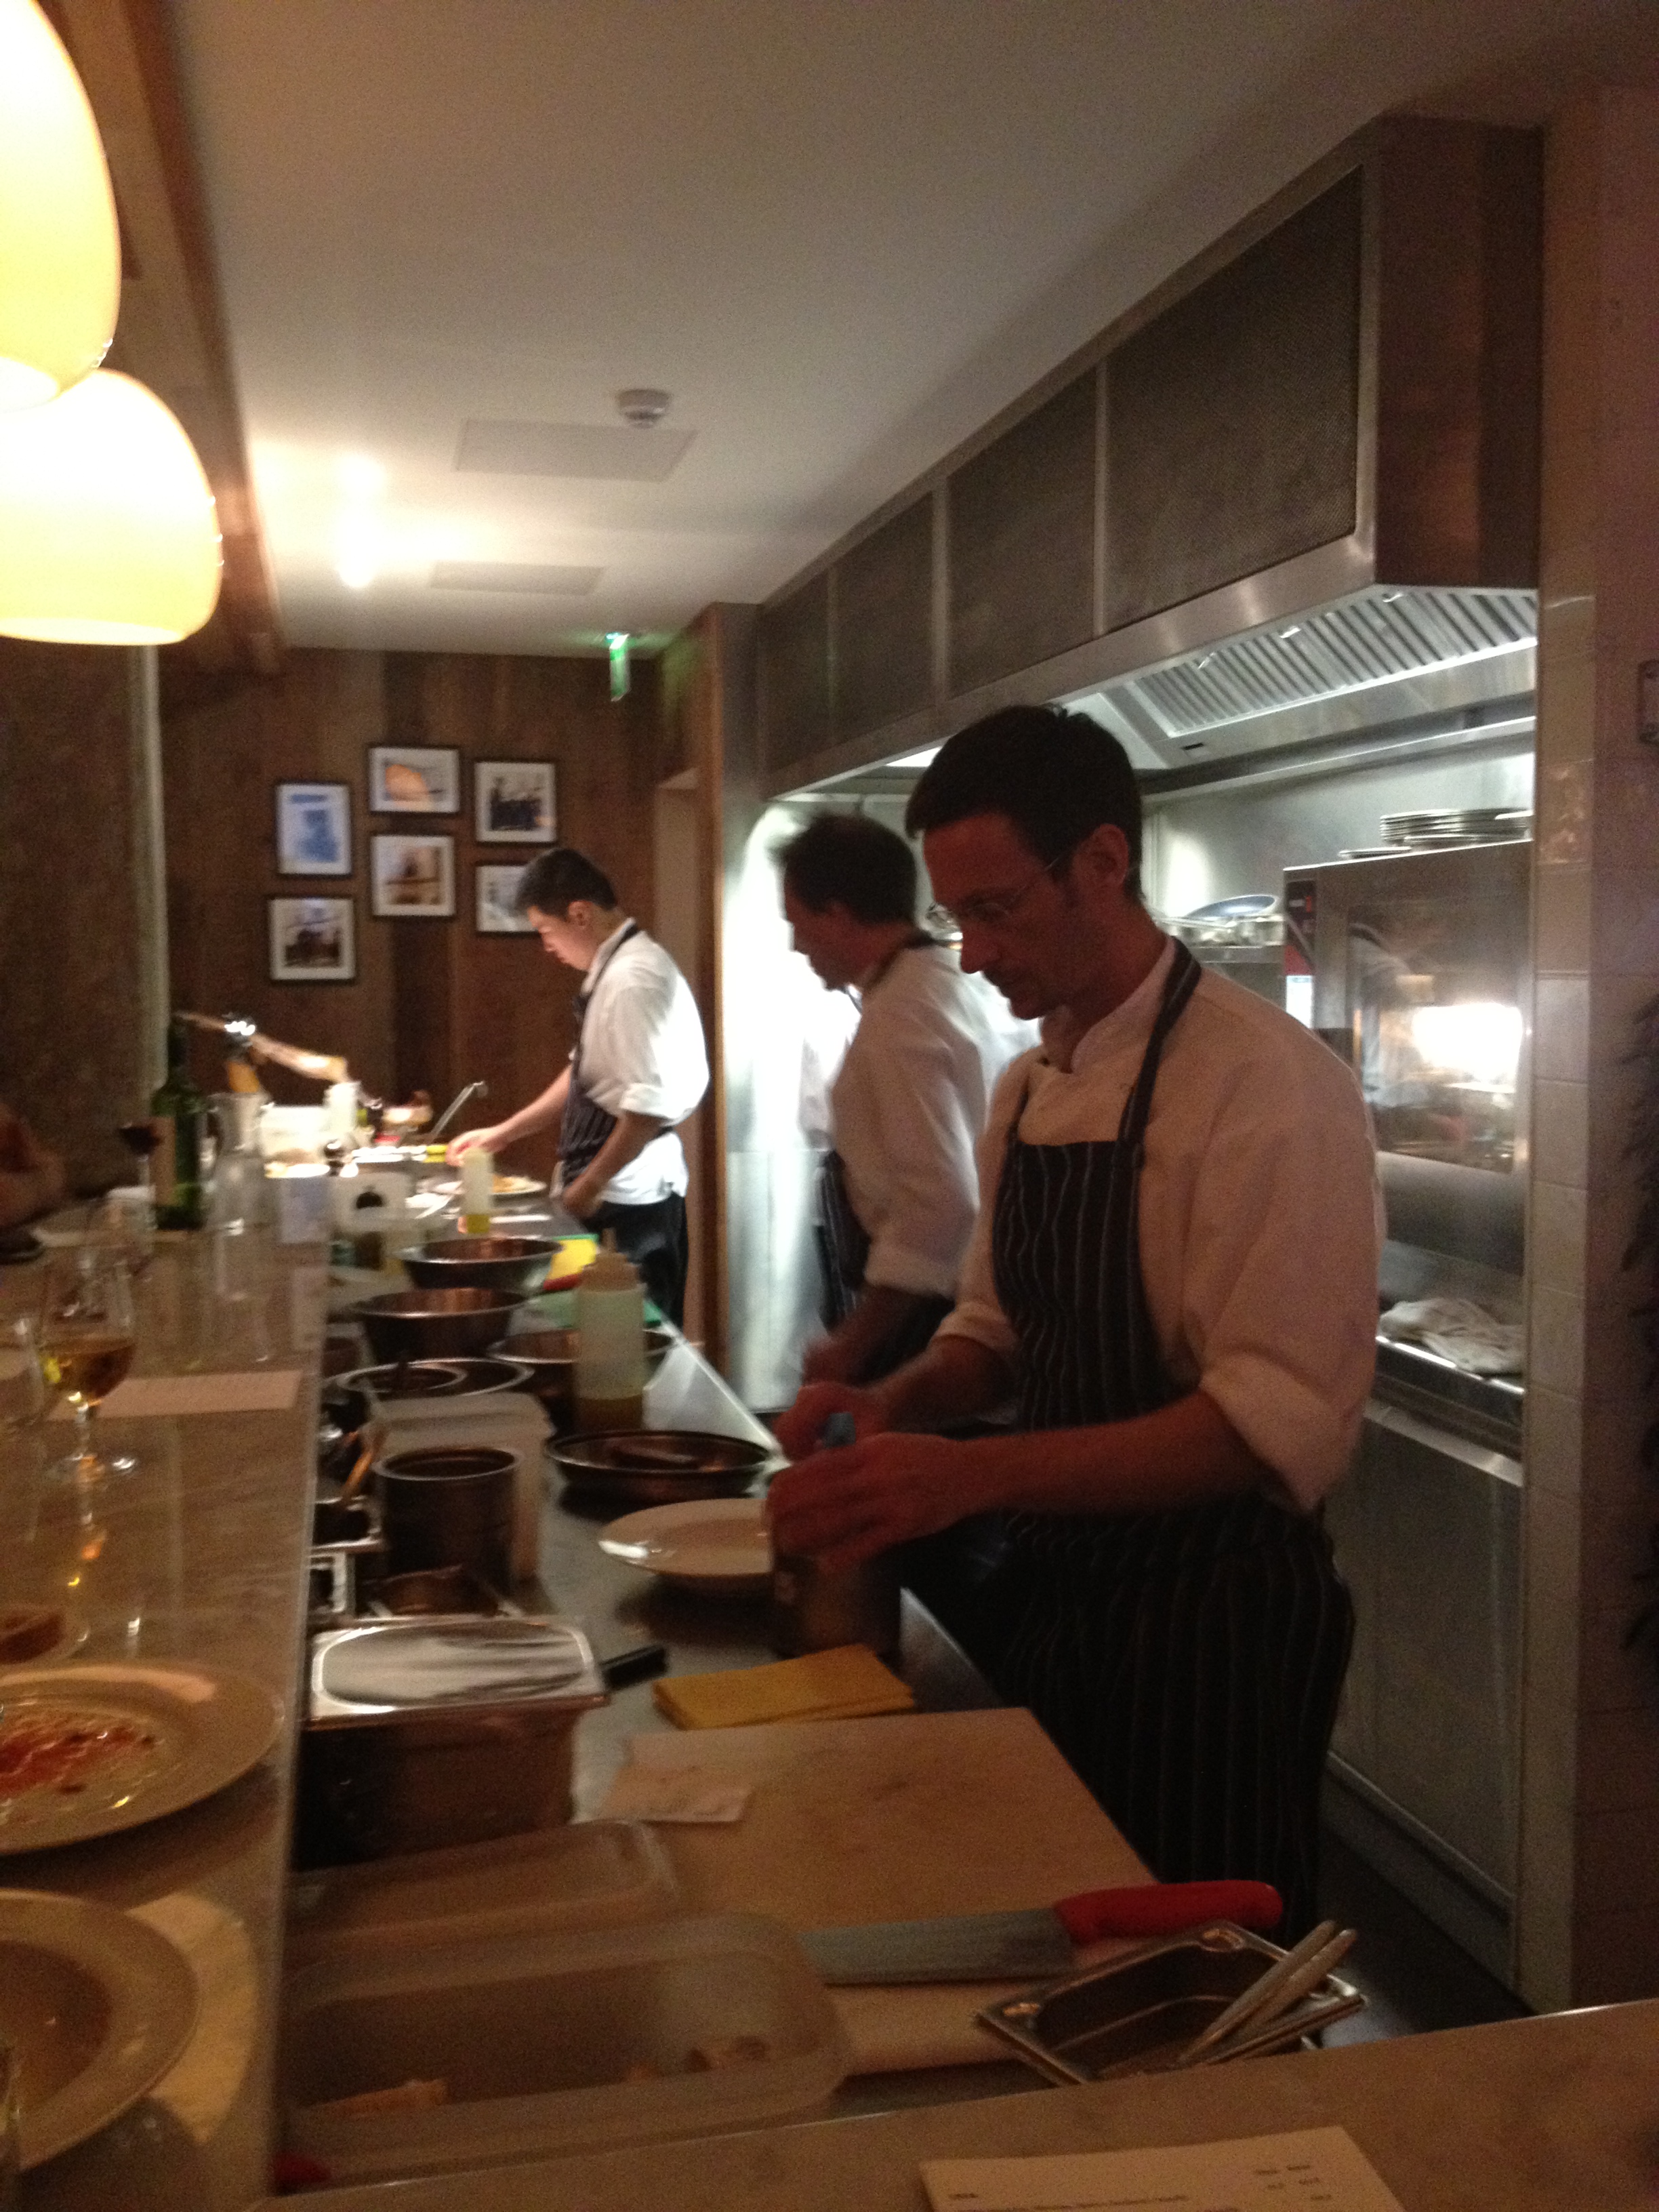 The chefs' table behind the bar at Pizarro